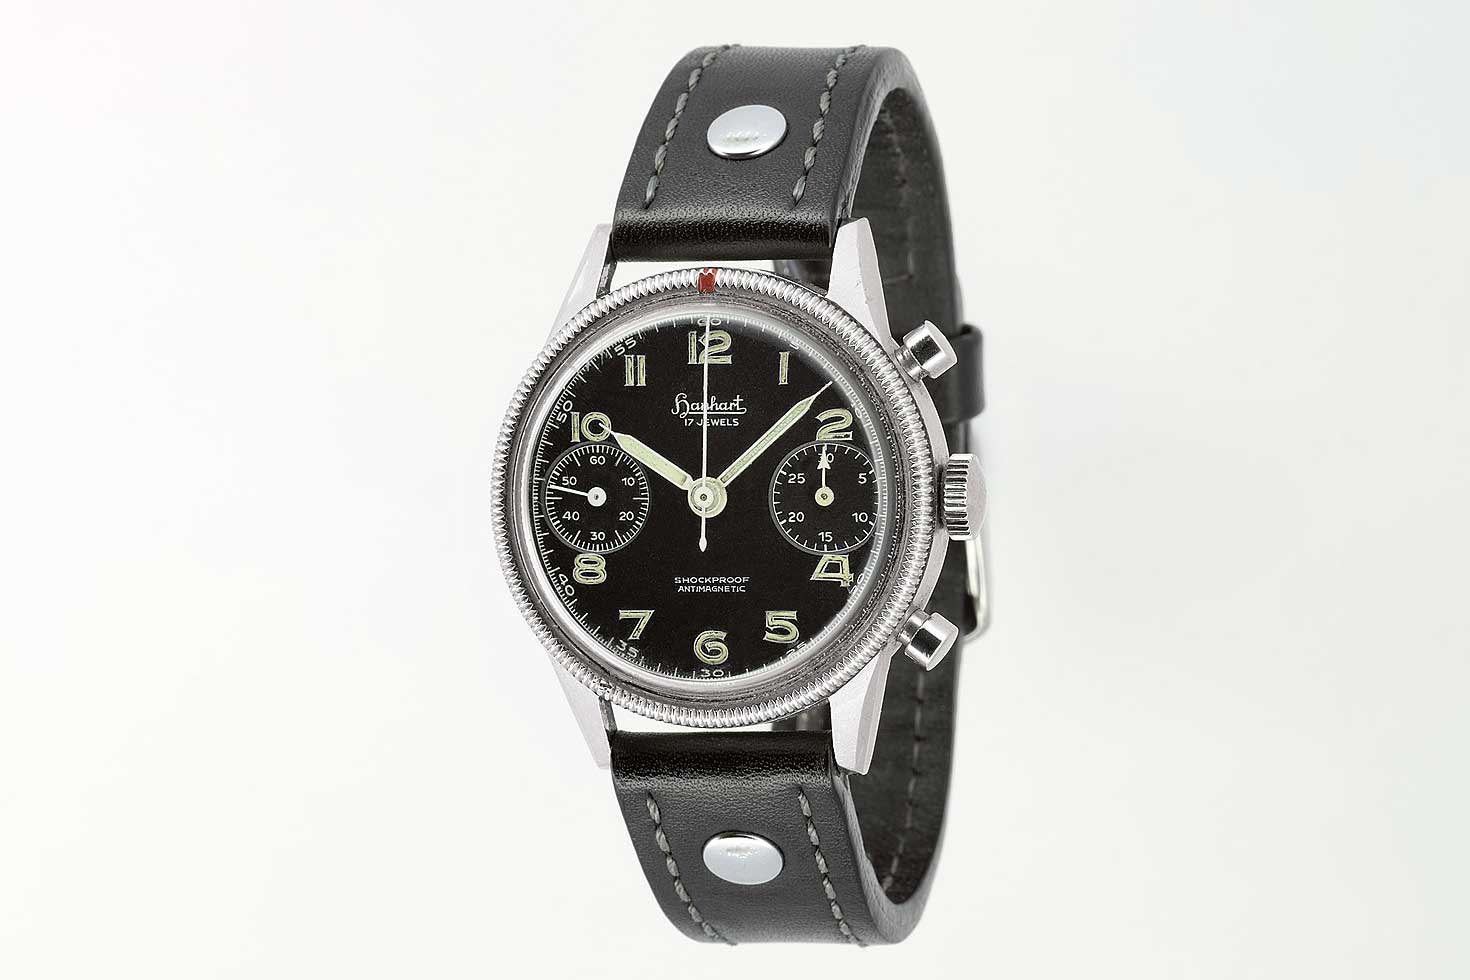 In 1956, Hanhart produced its legendary pilot’s watches, with the updated Calibre 42, quickly distinguished from the WWII-era timepieces by modern pencil-shaped hands. (Image: Hanhart.com)